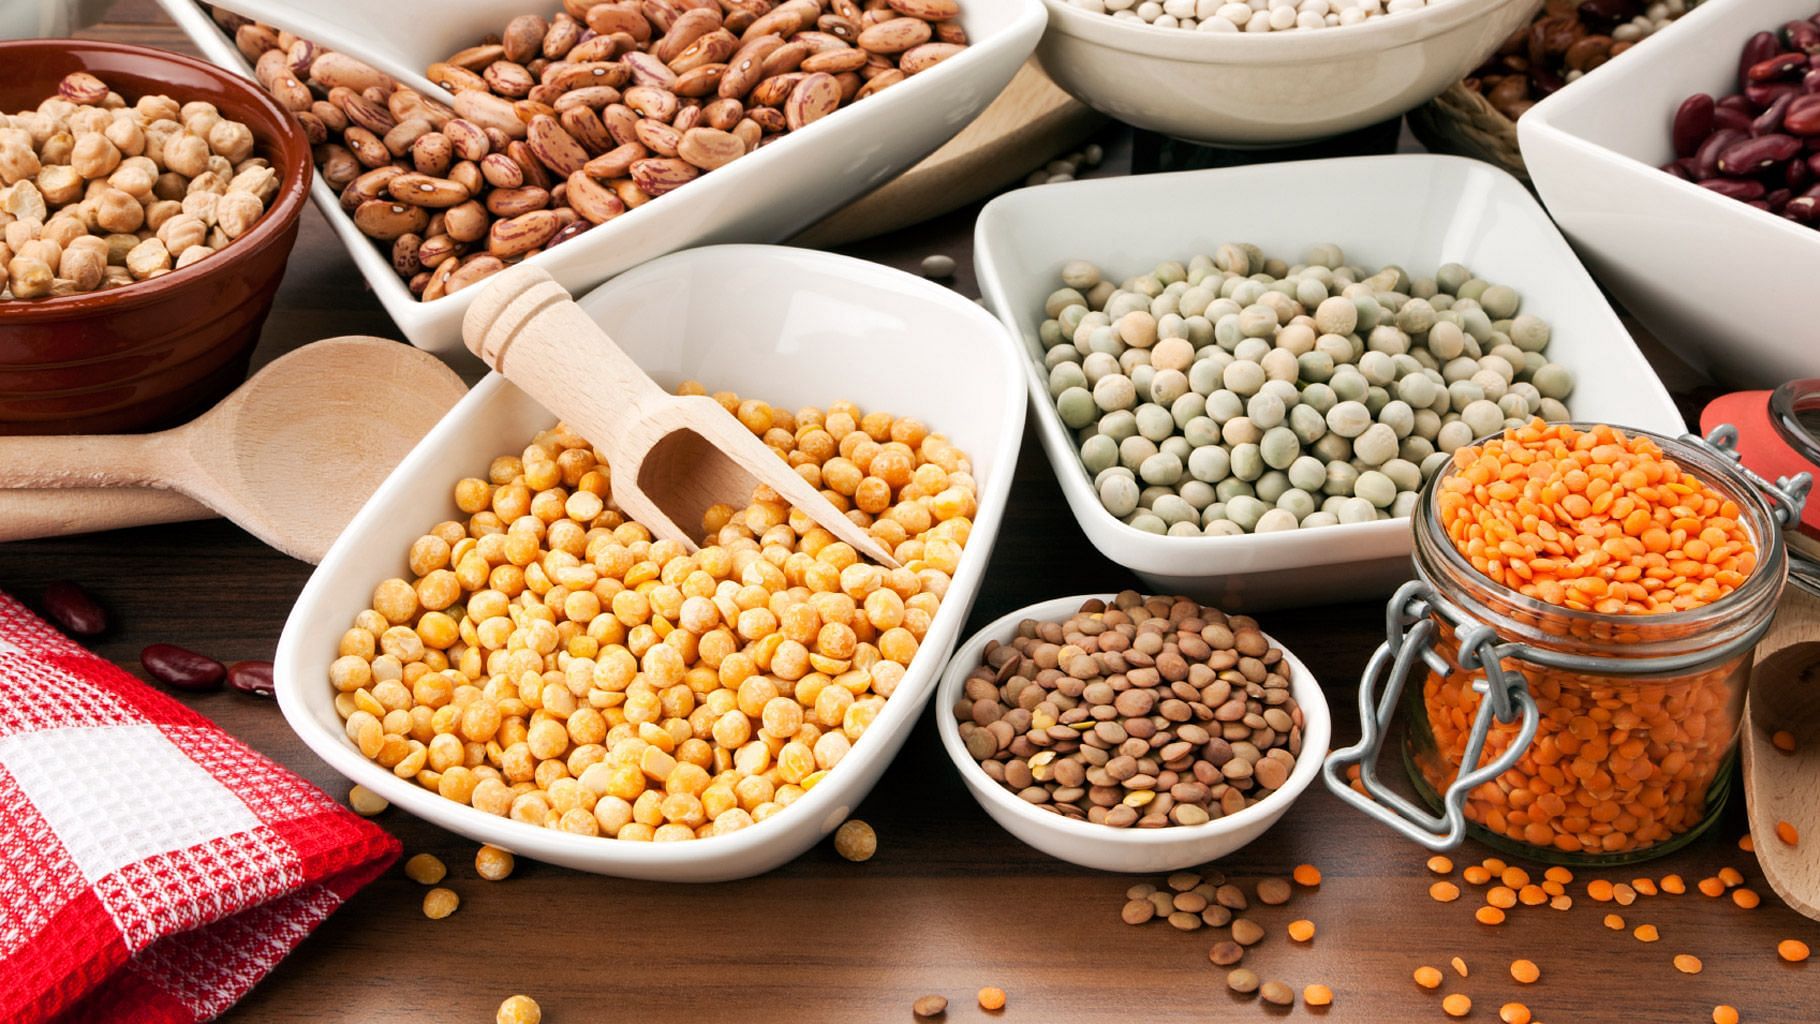 Image of pulses used for representational purposes.